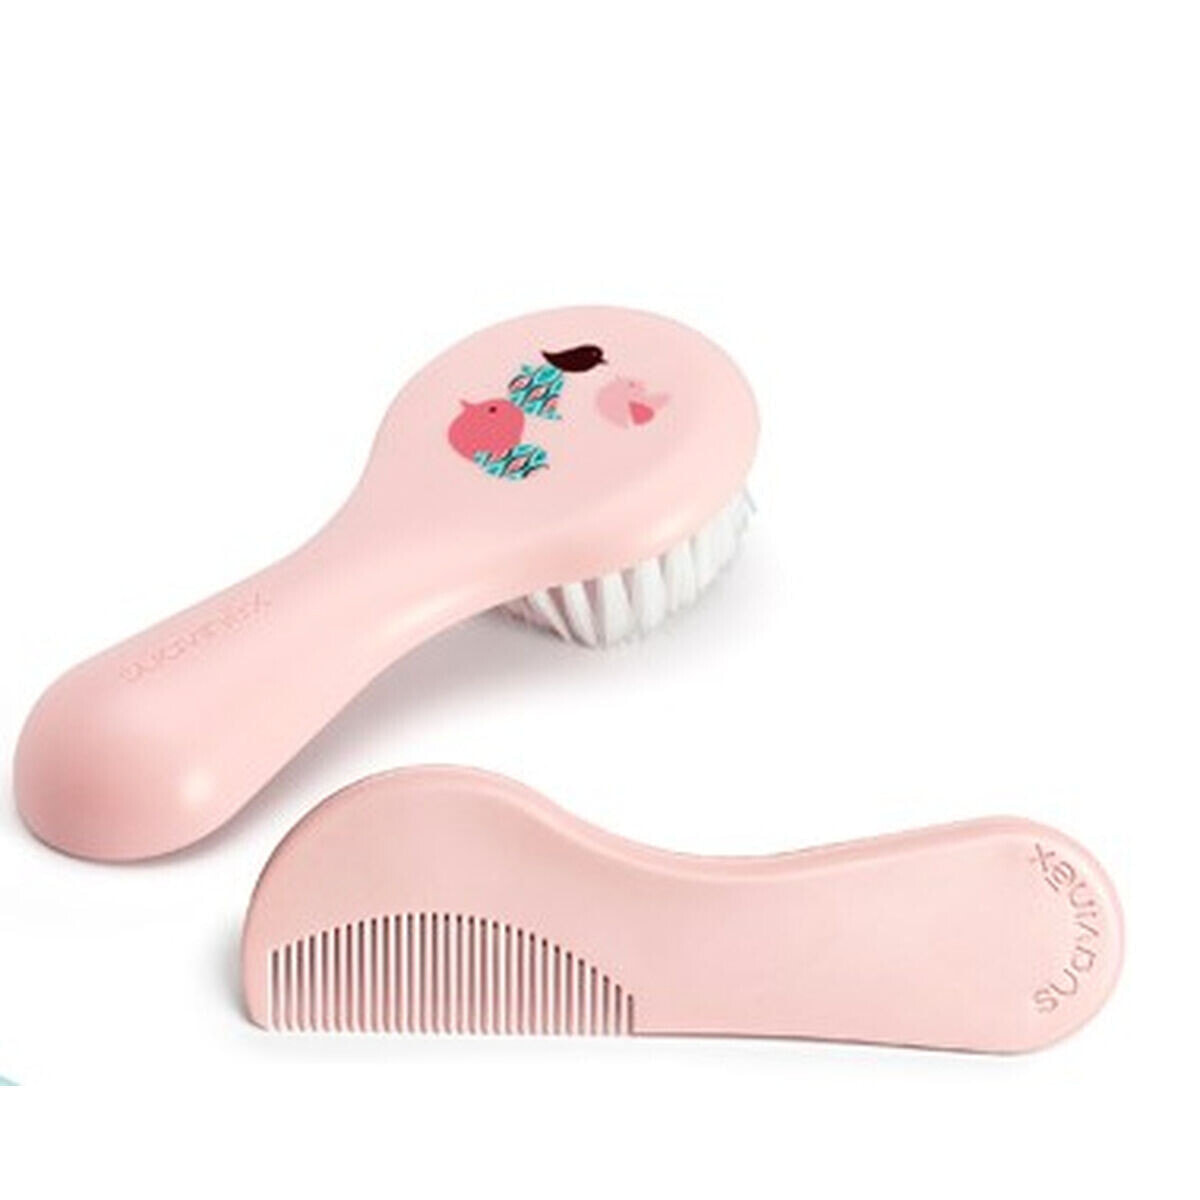 Set of combs/brushes Suavinex Hygge Baby Cepillo Rosa Pink 2 Units (2 Pieces)